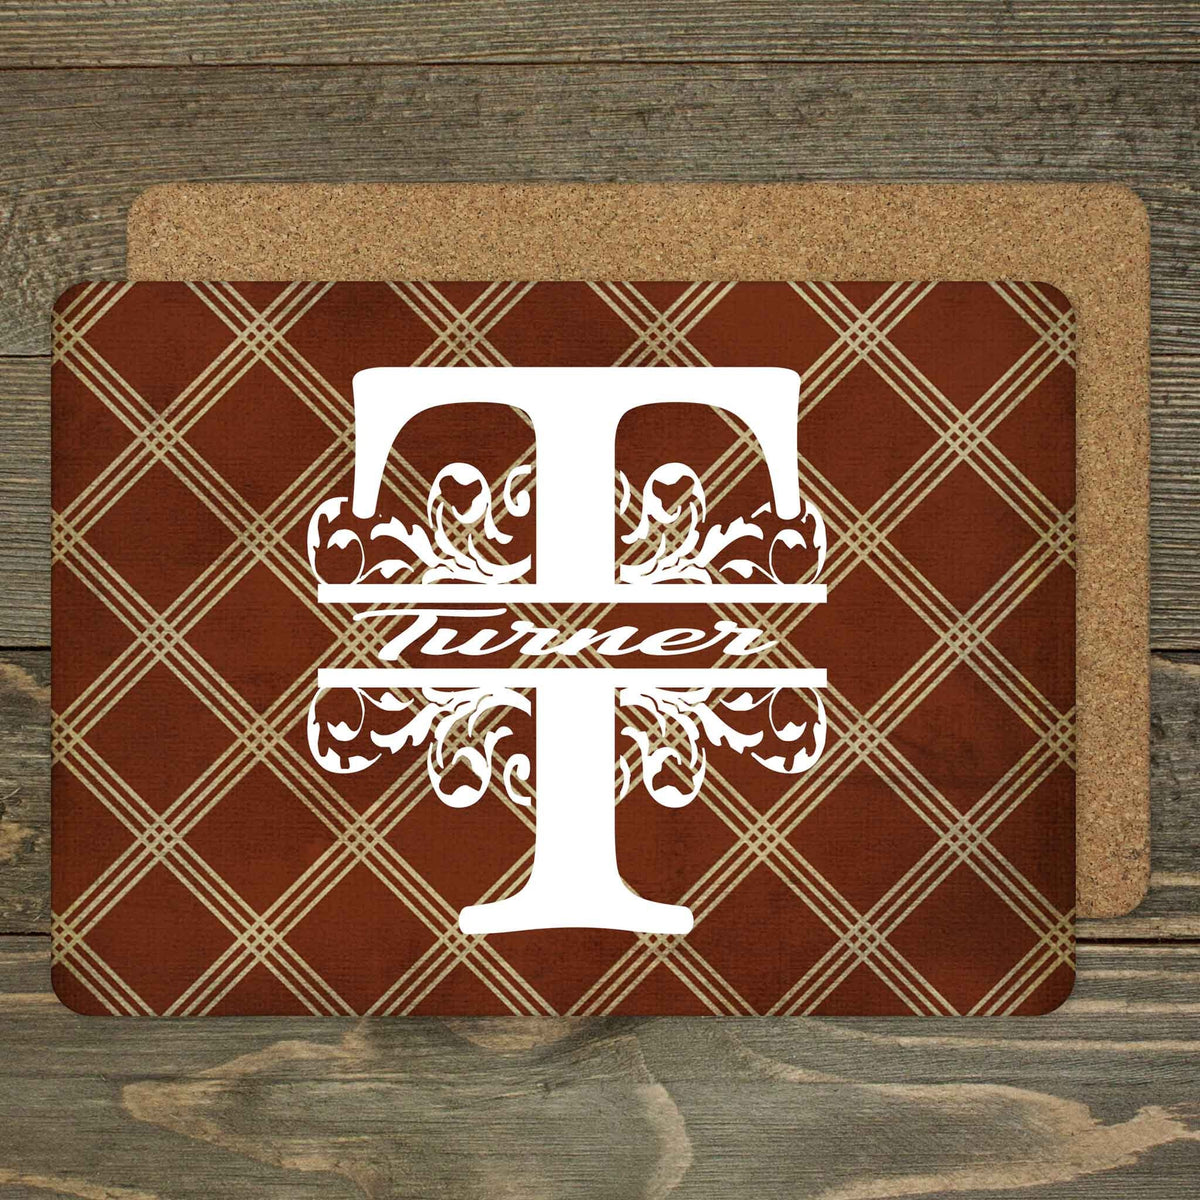 Custom Placemats | Personalized Dining and Serving | Brown Argyle